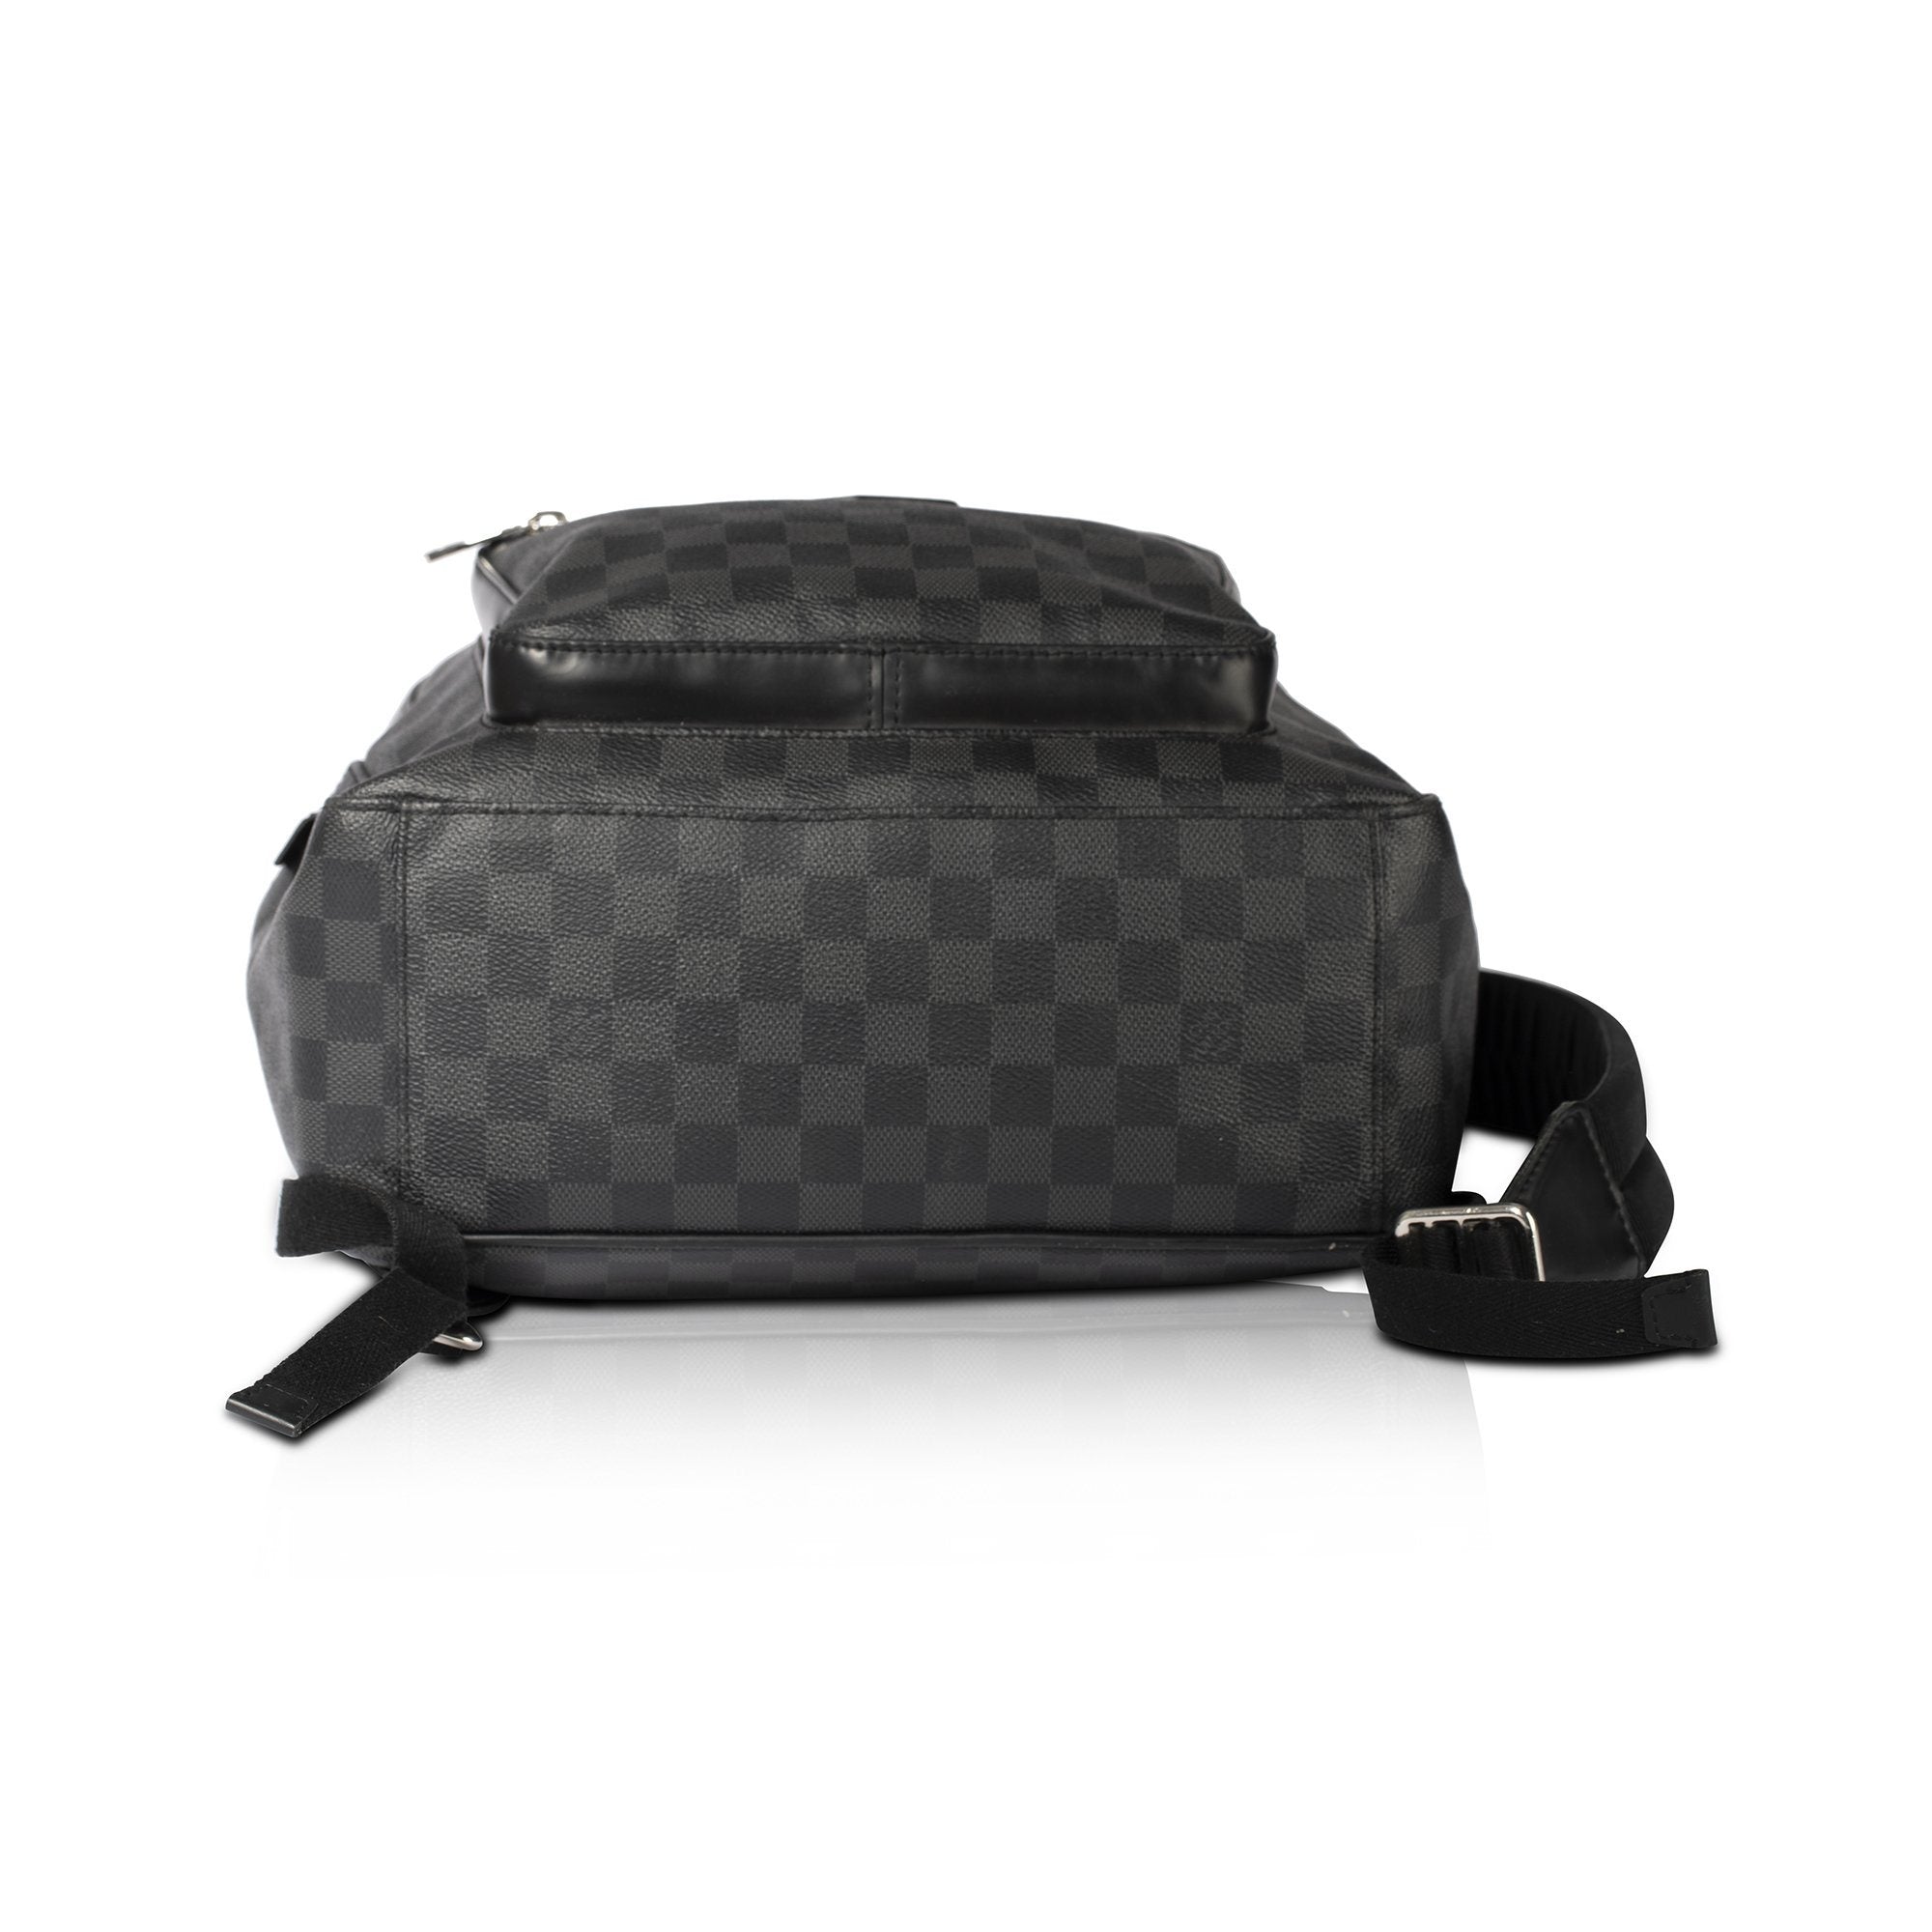 LOUIS VUITTON Zack Backpack Damier Graphite Canvas N40005 Black Leather